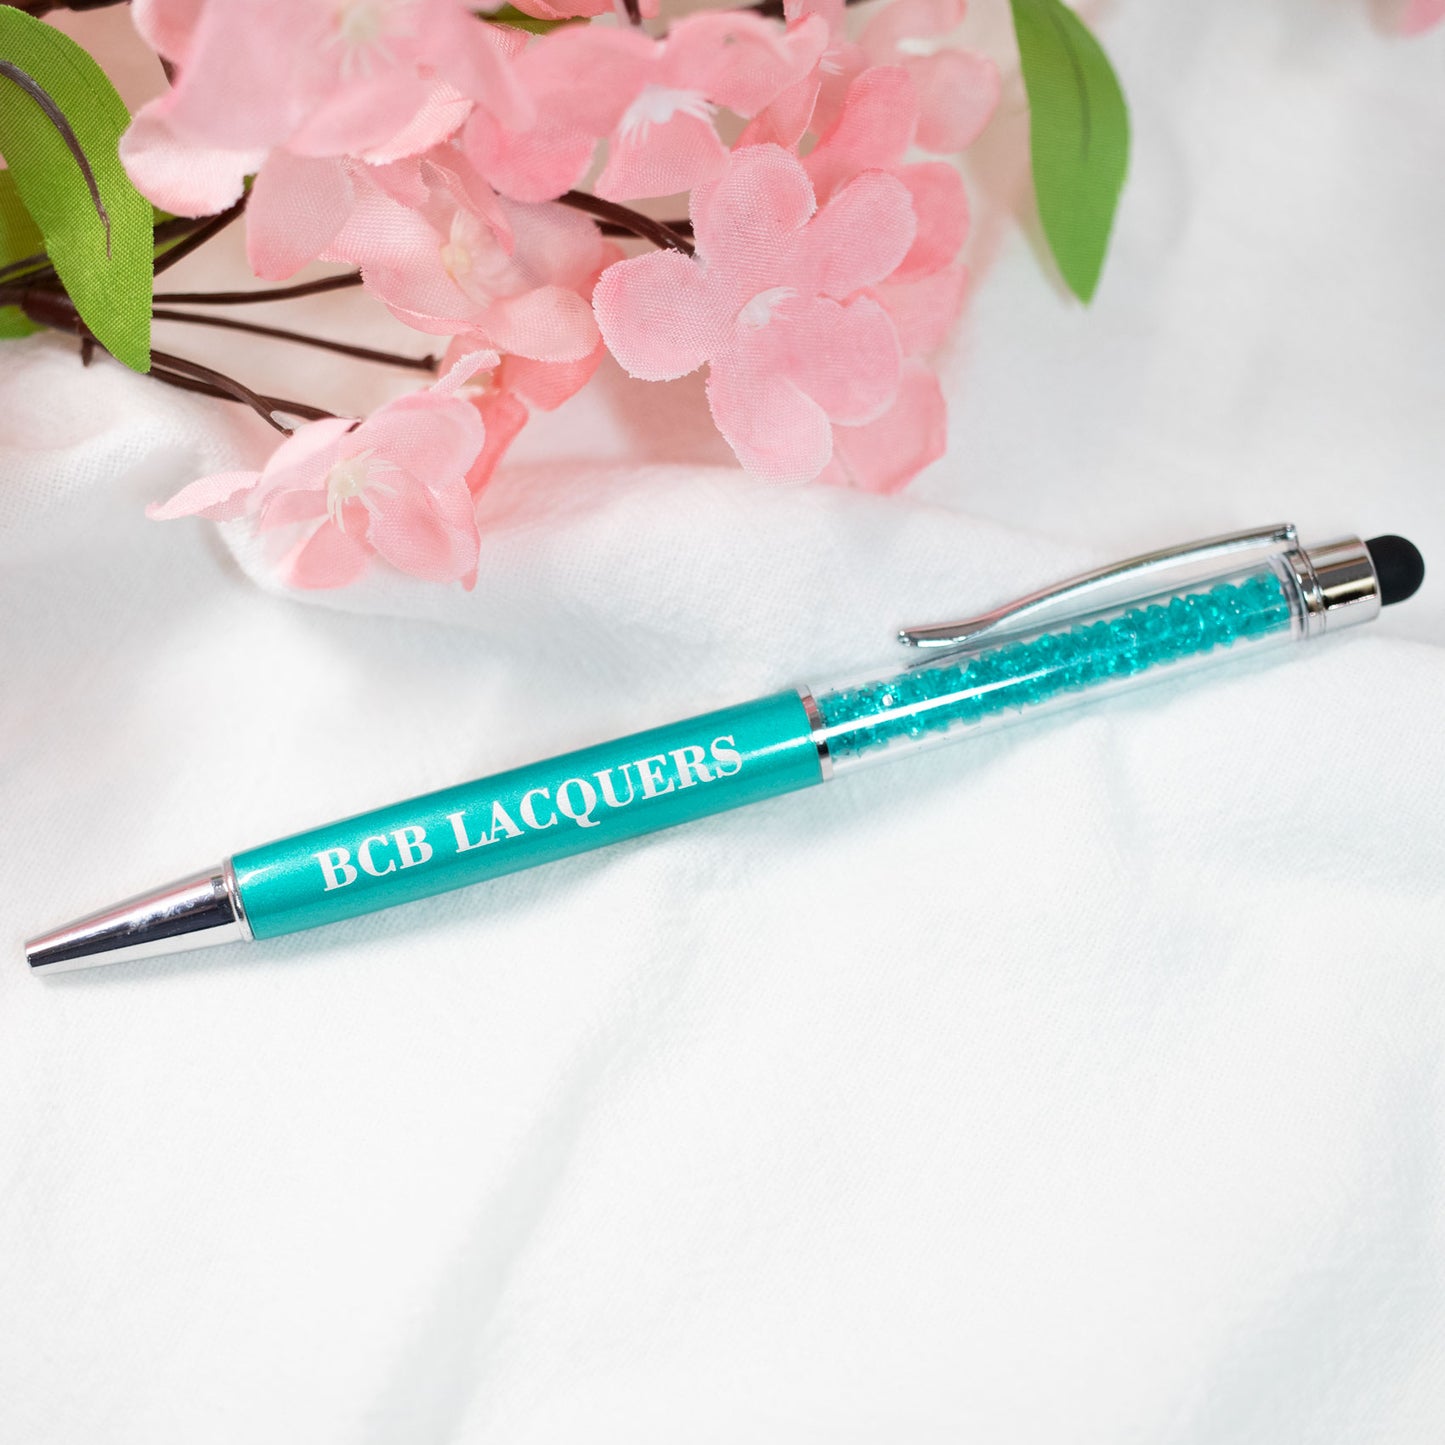 BCB Lacquers Engraved Pen with Ball Point Tip & Stylus